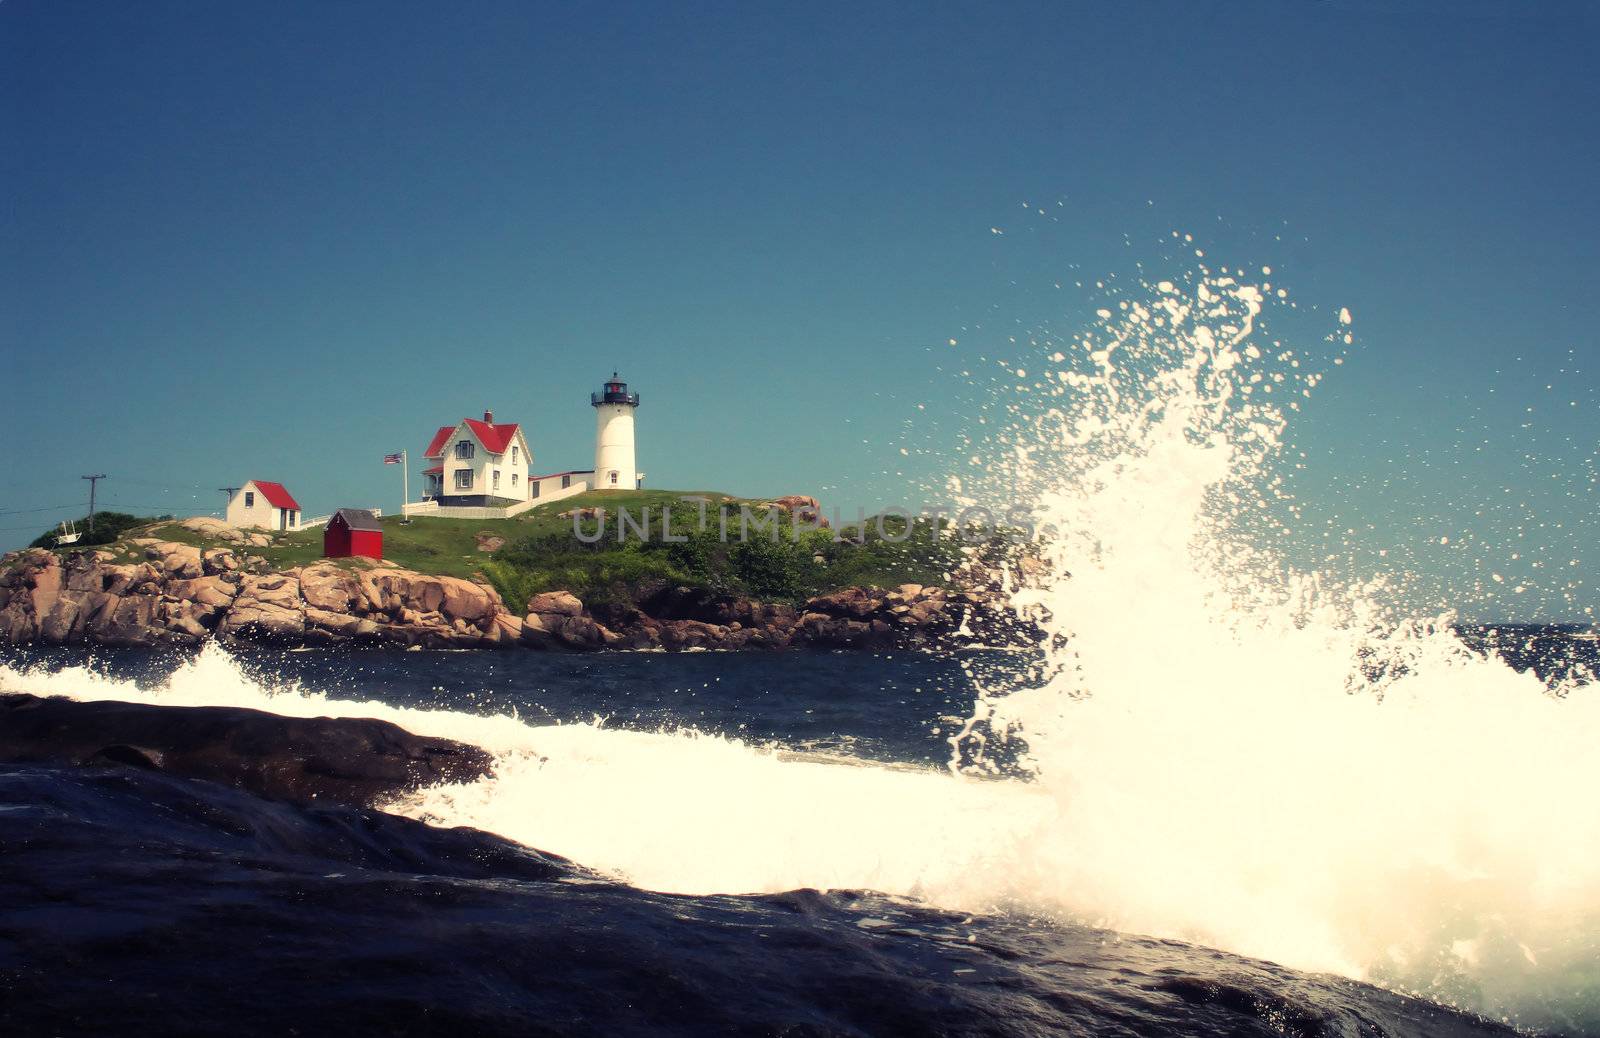 Waves crashing on rocks in front of the Nubble Lighthouse